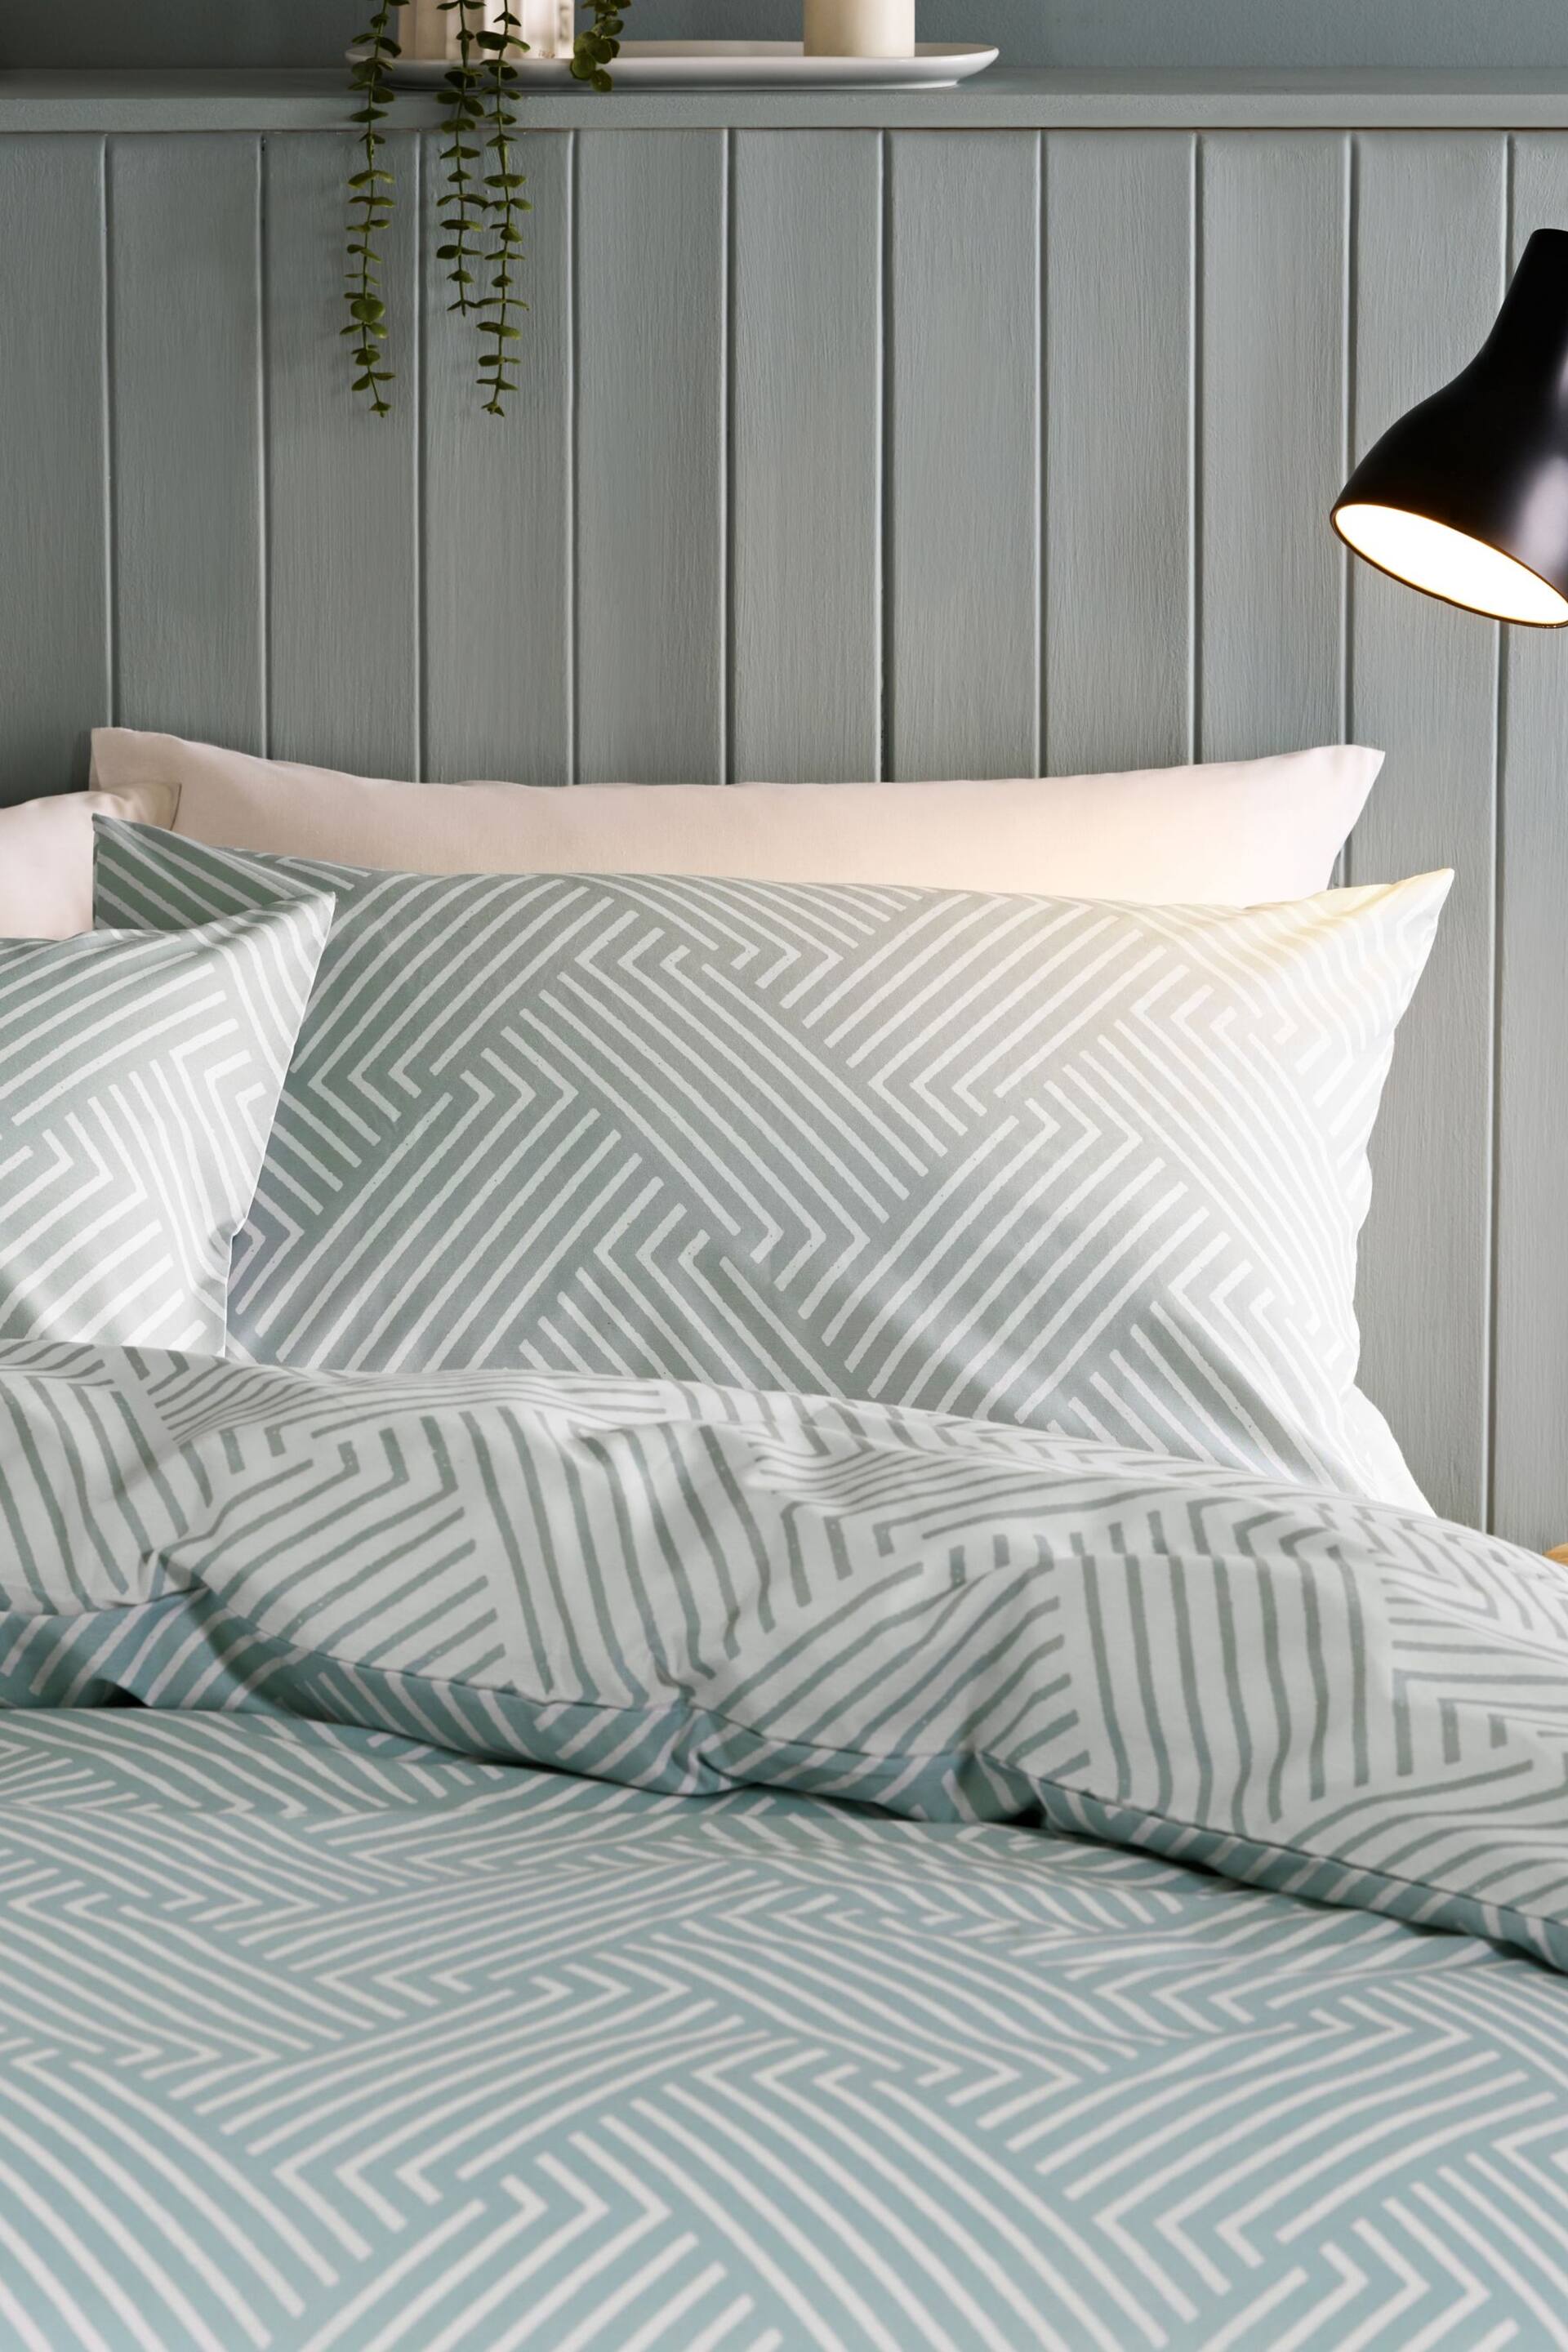 Sage Green Geometric Duvet Cover and Pillowcase Set - Image 3 of 6